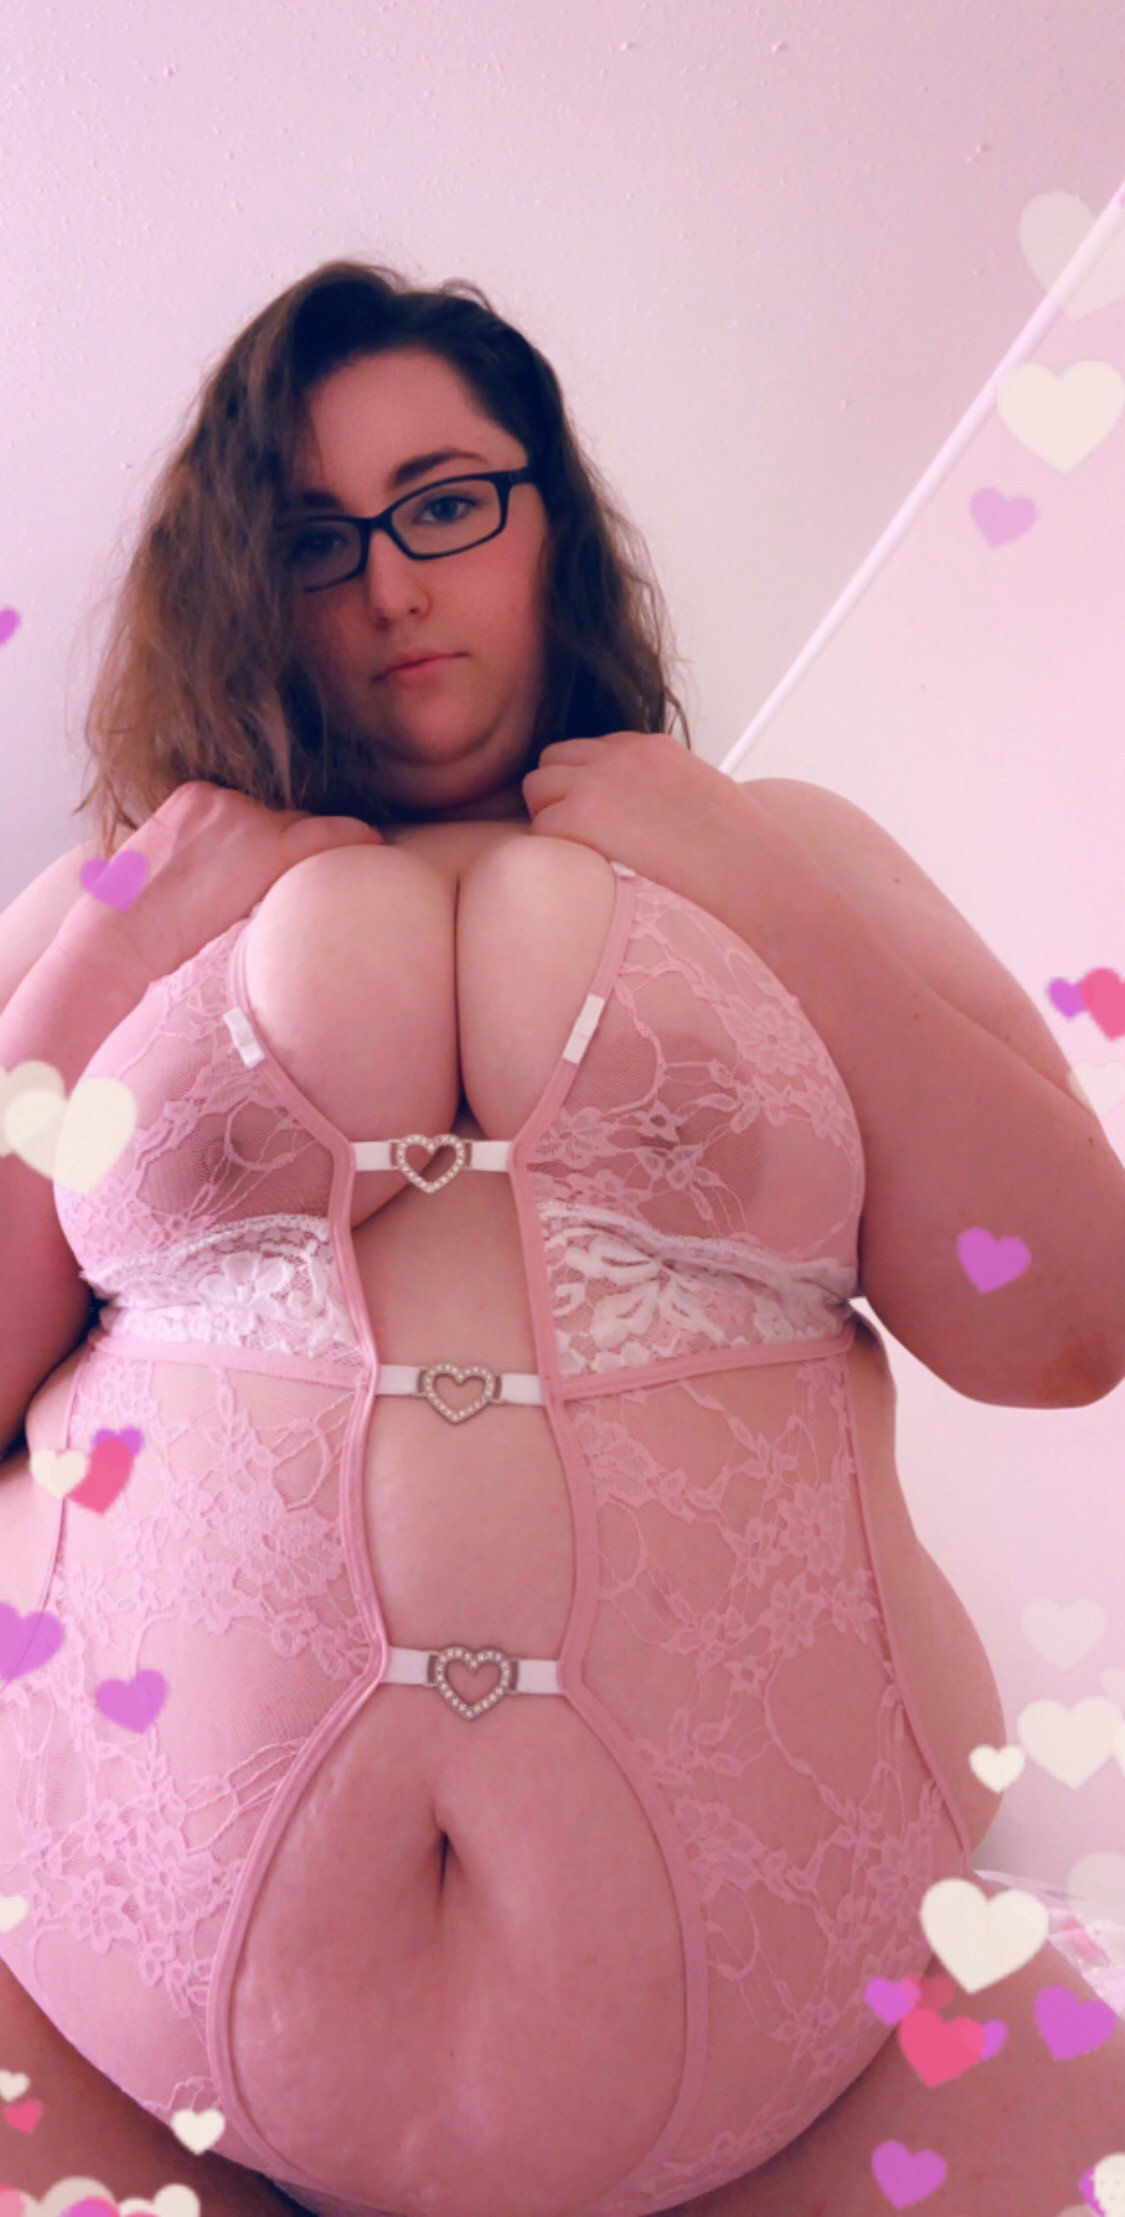 Photo by thegoodhausfrau with the username @thegoodhausfrau, who is a star user,  April 29, 2019 at 11:45 PM. The post is about the topic BBW and the text says 'I am rather soft'